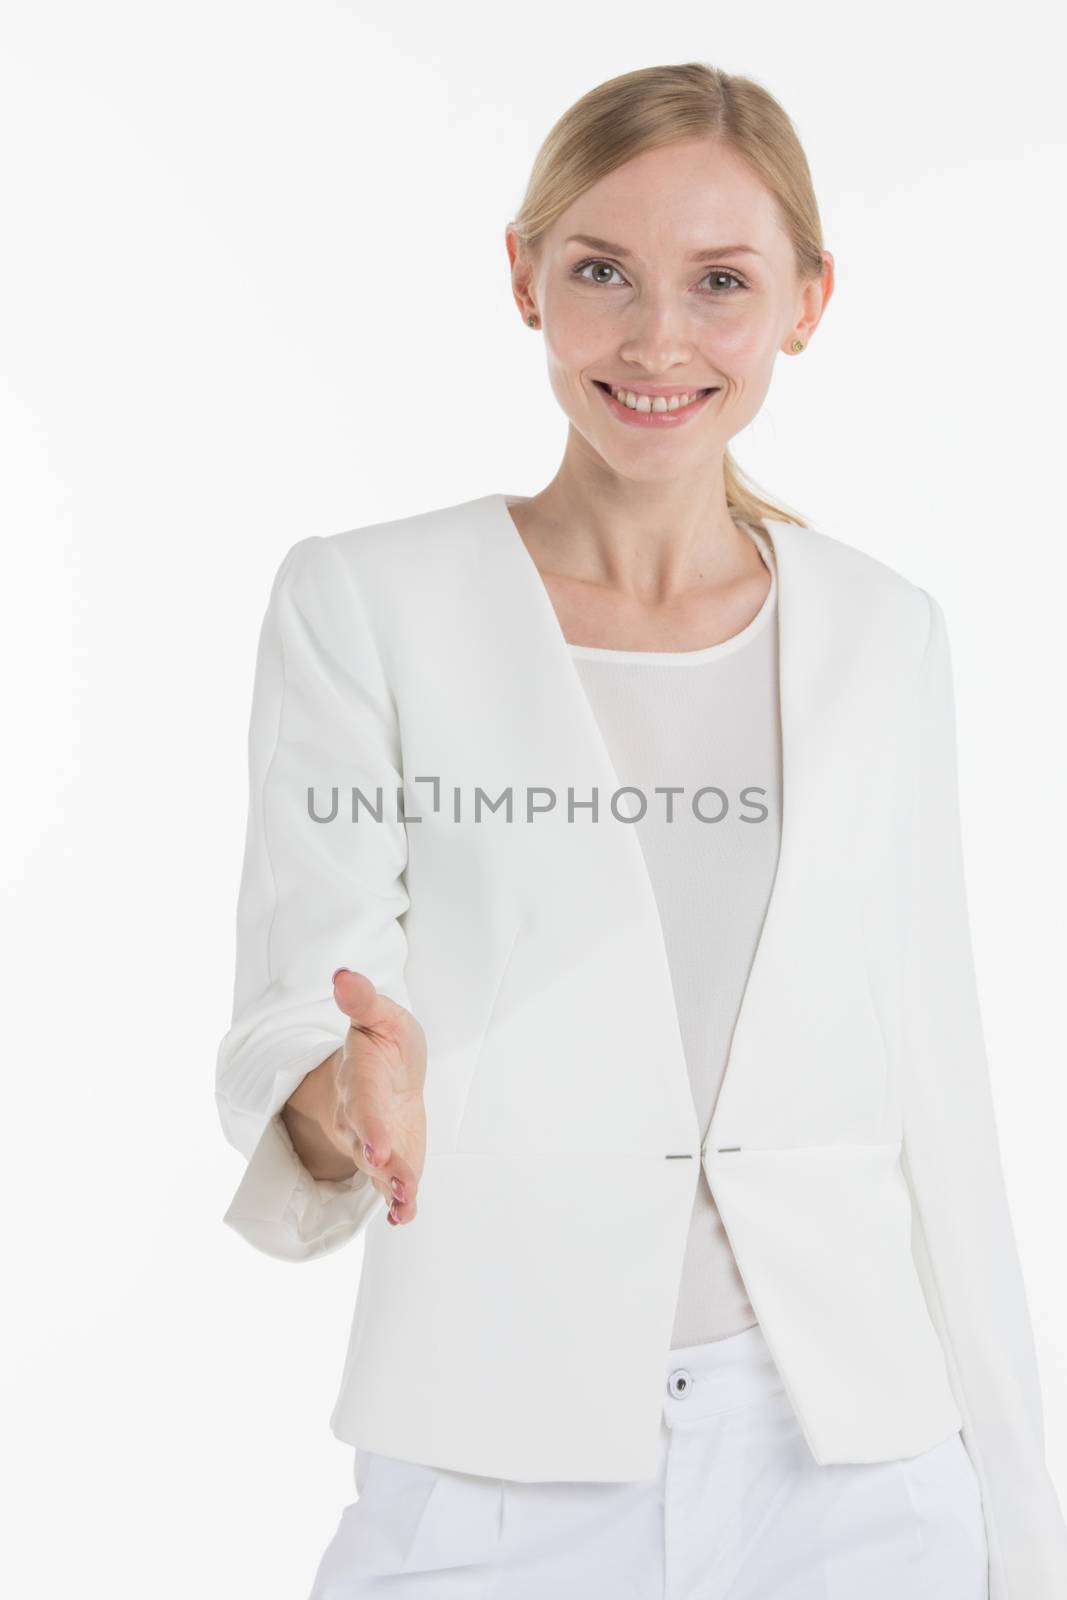 Business woman stretching out hand for shaking, nice to meet you concept, isolated on white background